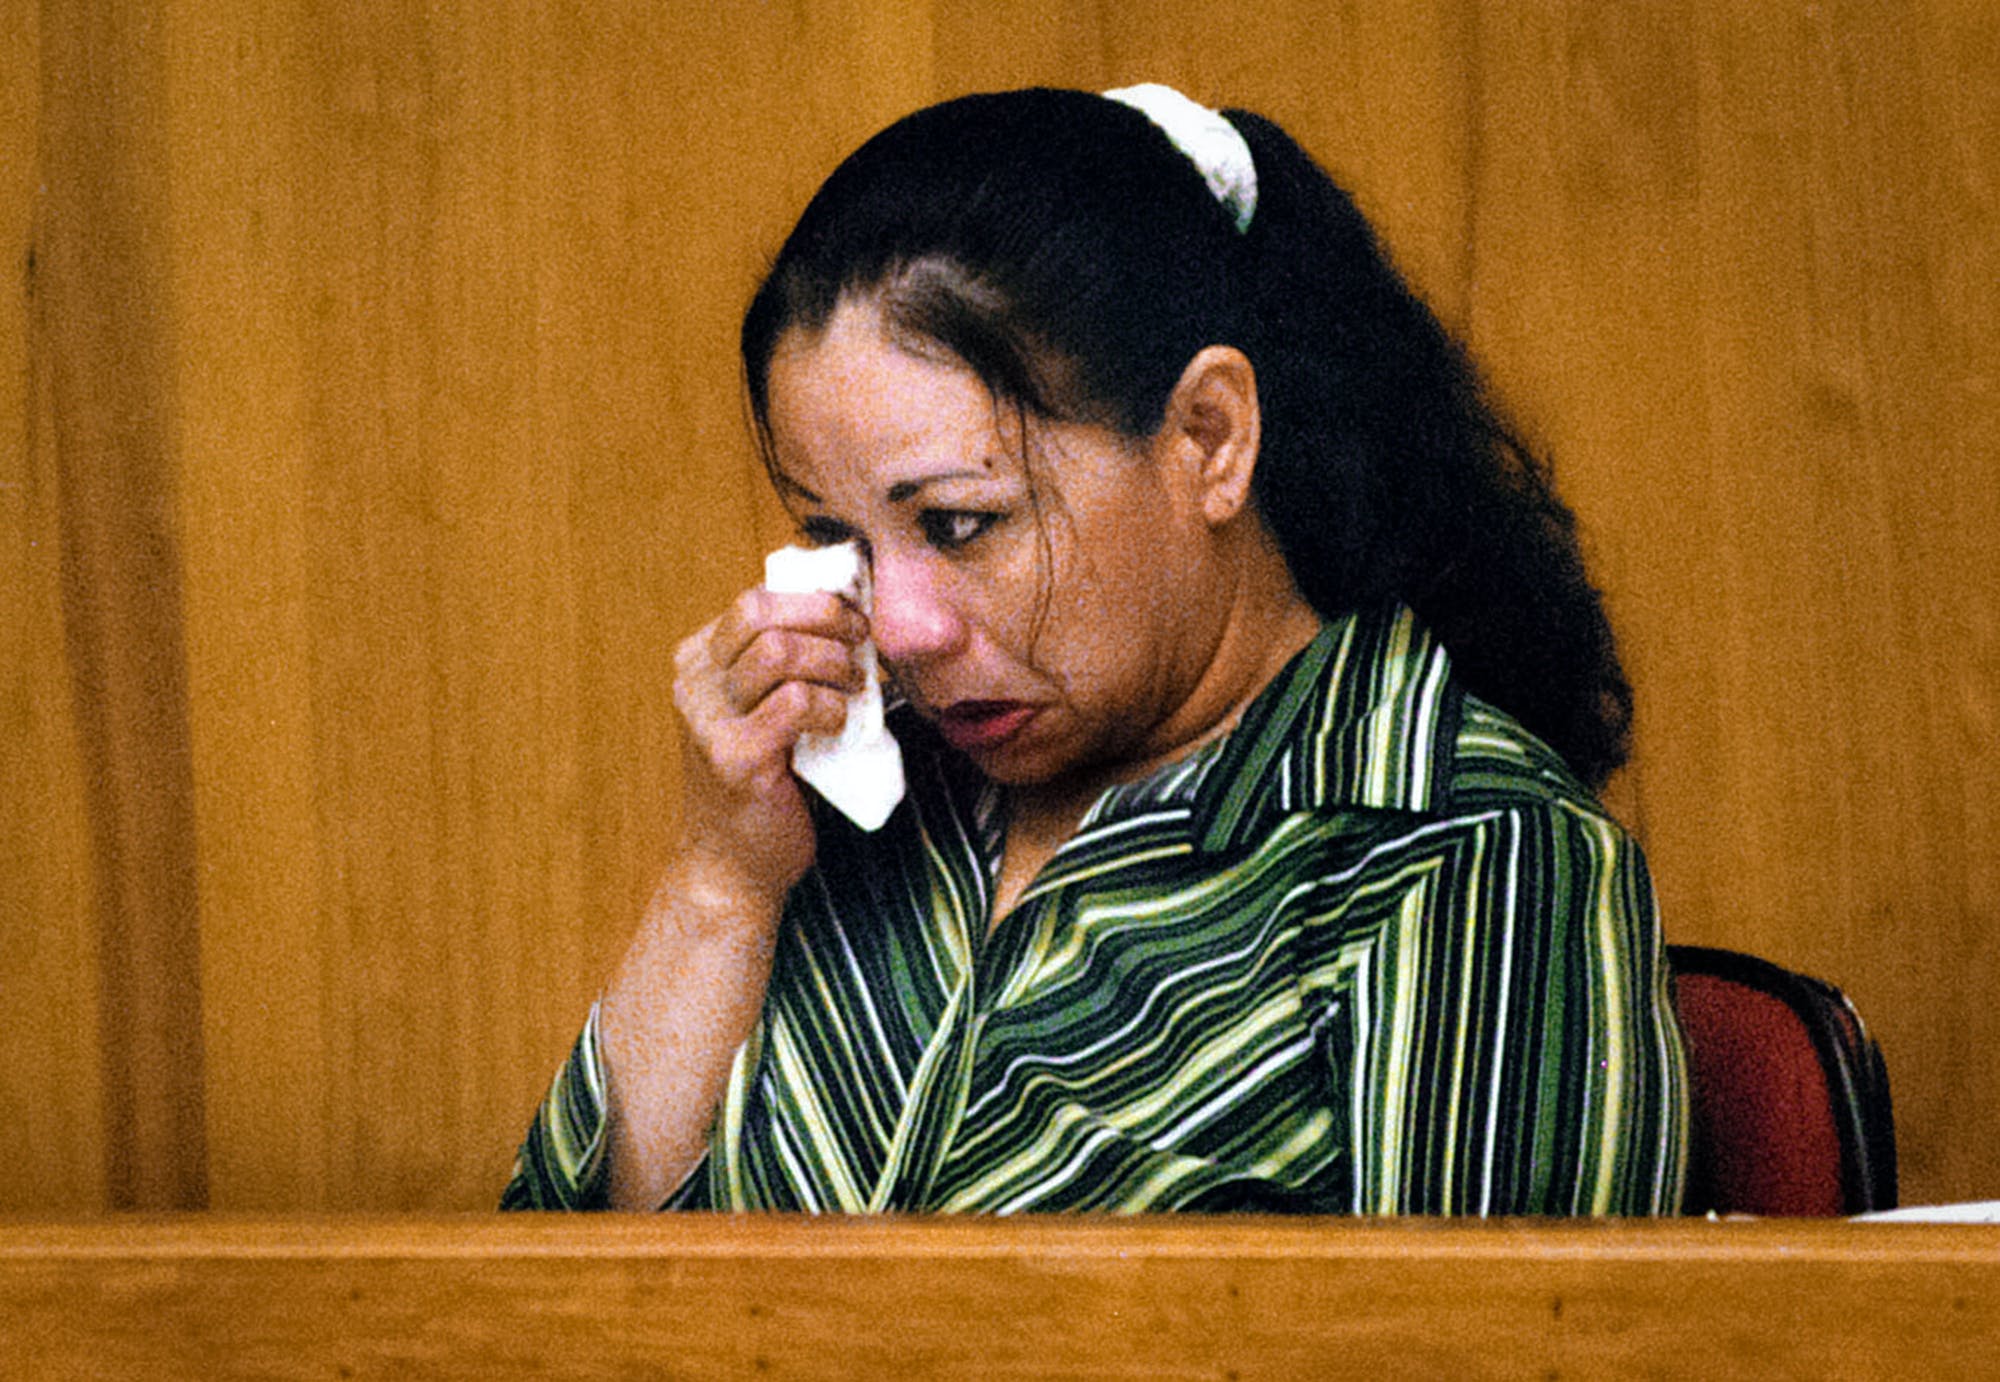 Melissa Elizabeth Lucio was sentenced to death Thursday July 10, 2008 in Brownsville, Texas. Lucio, 39, was convicted on Tuesday for the Feb. 17, 2007 beating death of her 2 1/2-year-old daughter Mariah Alvarez in a Lee Street, Harlingen, Texas apartment. Lucio is the first woman to be sentenced to death for capital murder in Cameron County in known history. (AP Photo/Valley Morning Star, Theresa Najera)